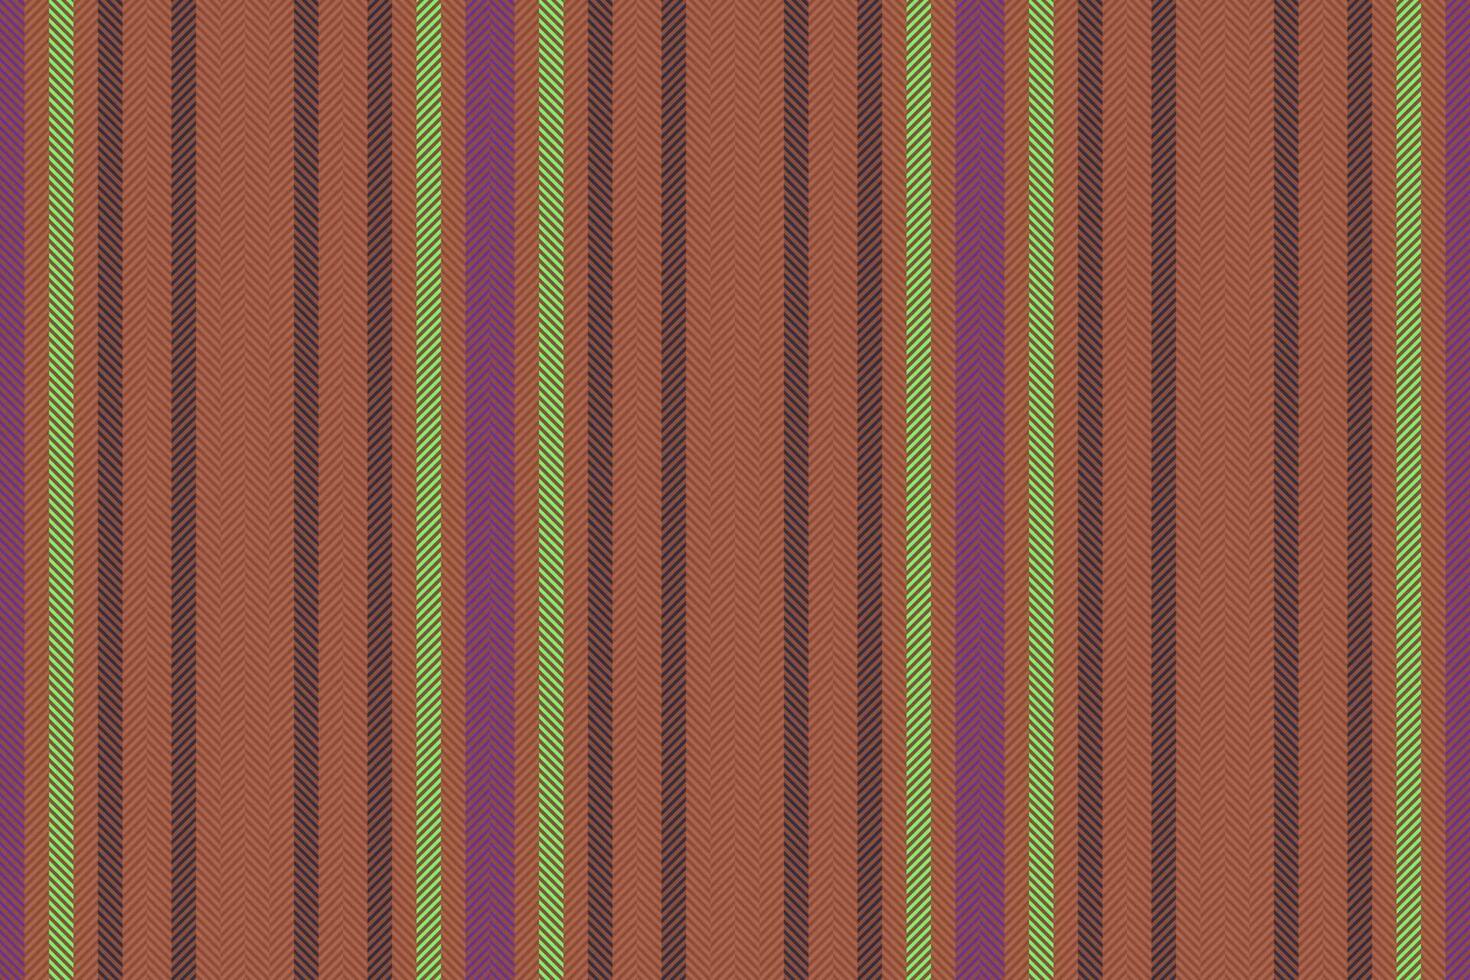 Vertical vector texture. Stripe pattern seamless. Textile lines background fabric.